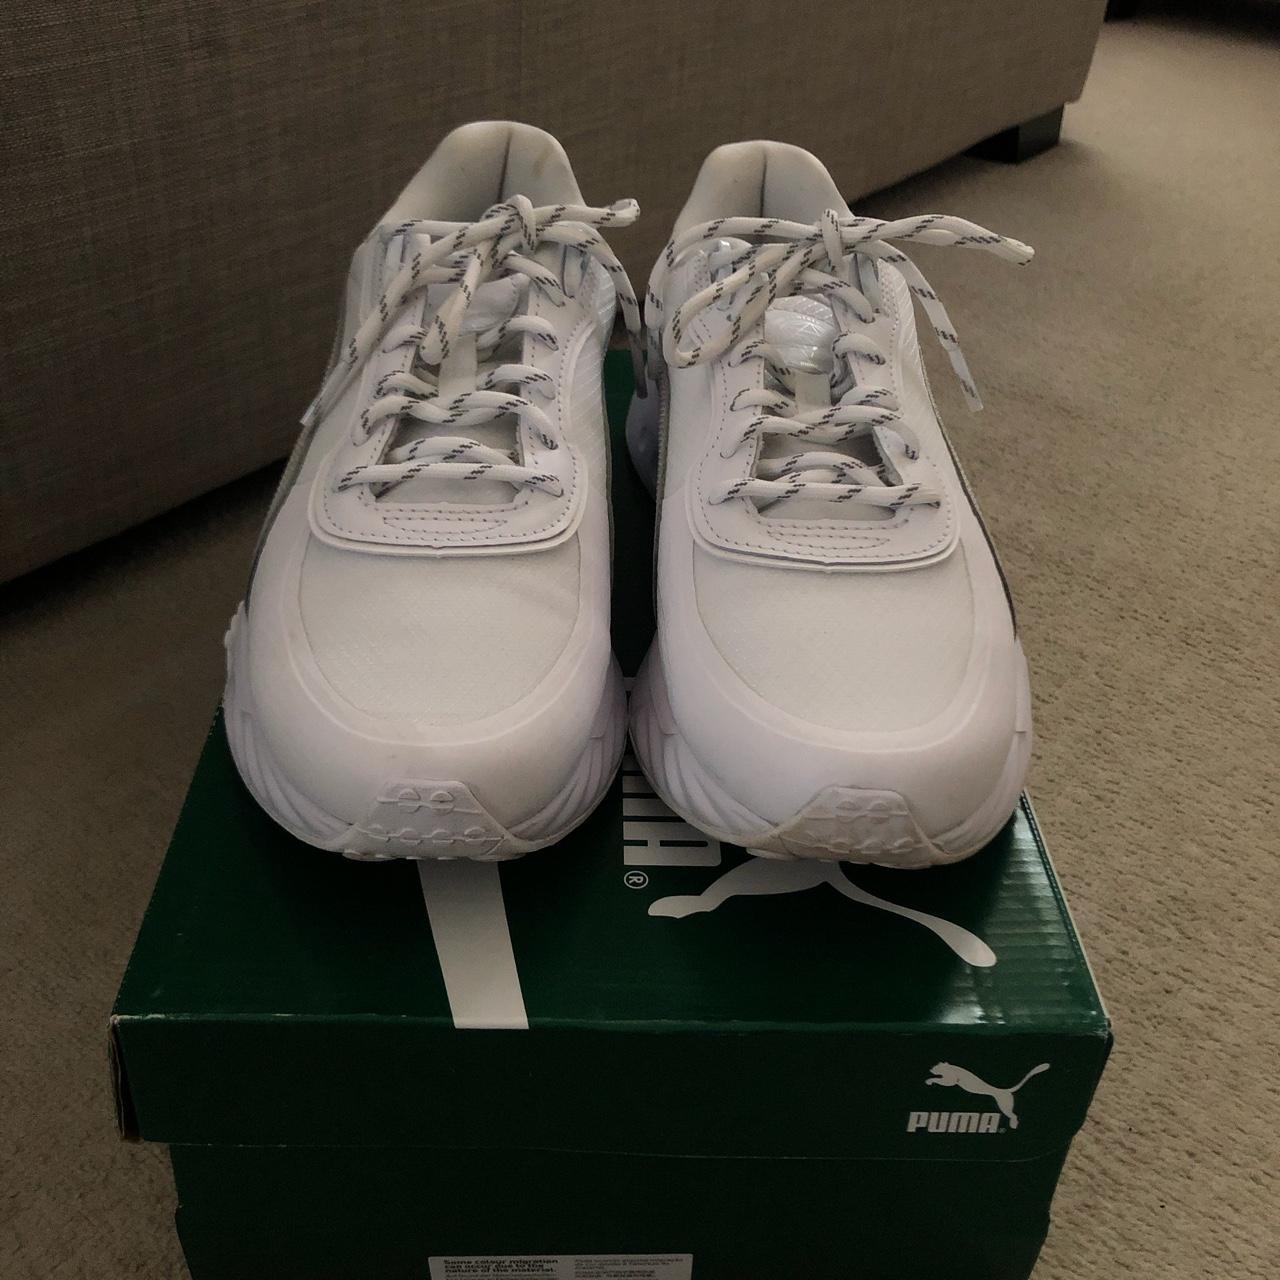 White puma trainers, size 5.5. Worn once - Depop